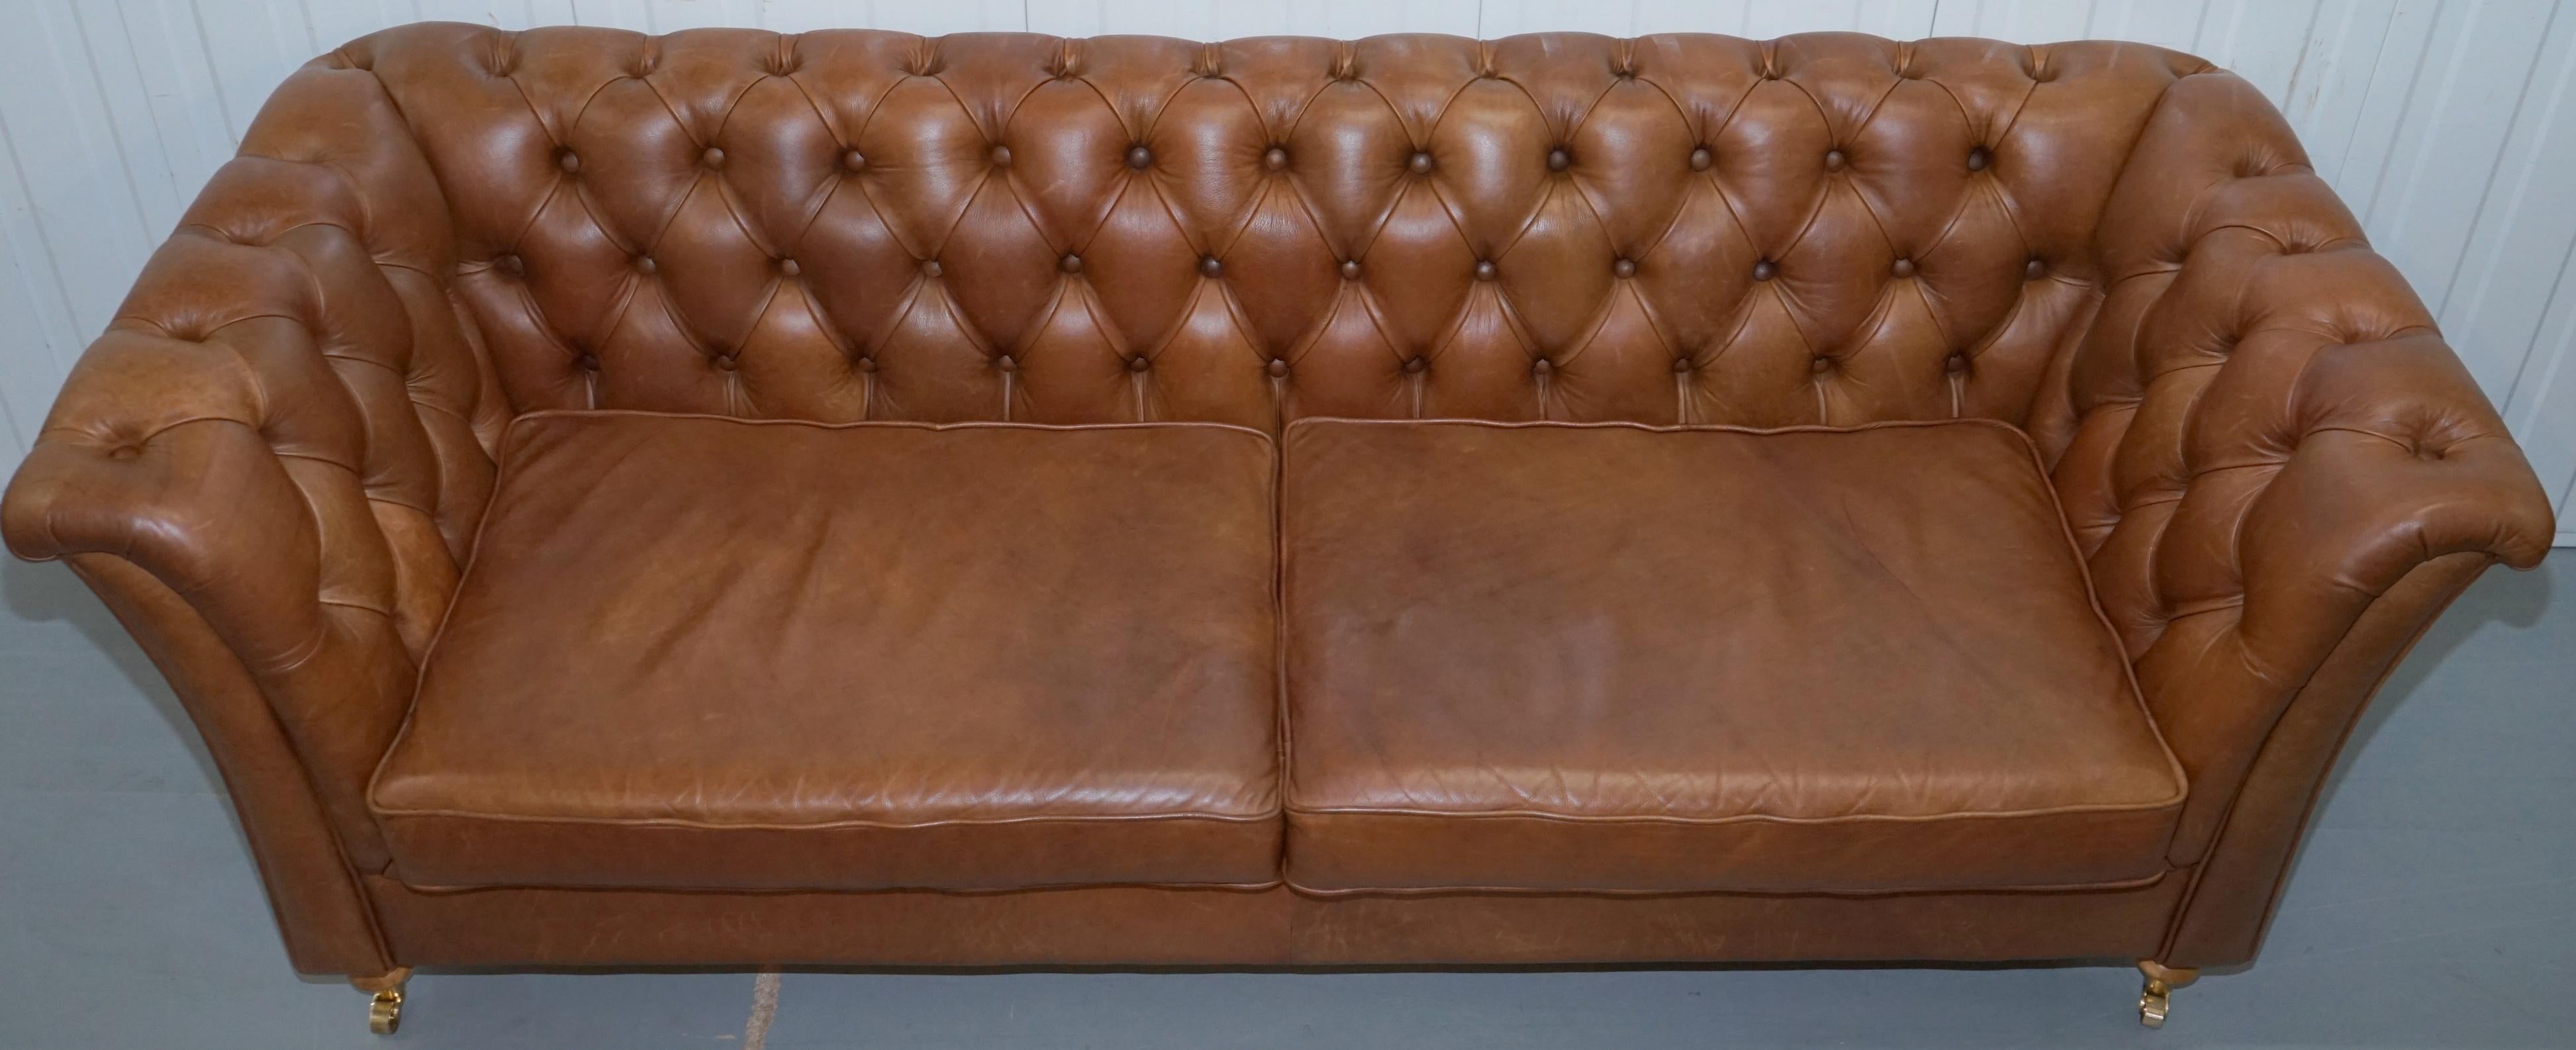 English Chestnut Brown Leather Chesterfield Sofa with Turned Oak Legs and Castors